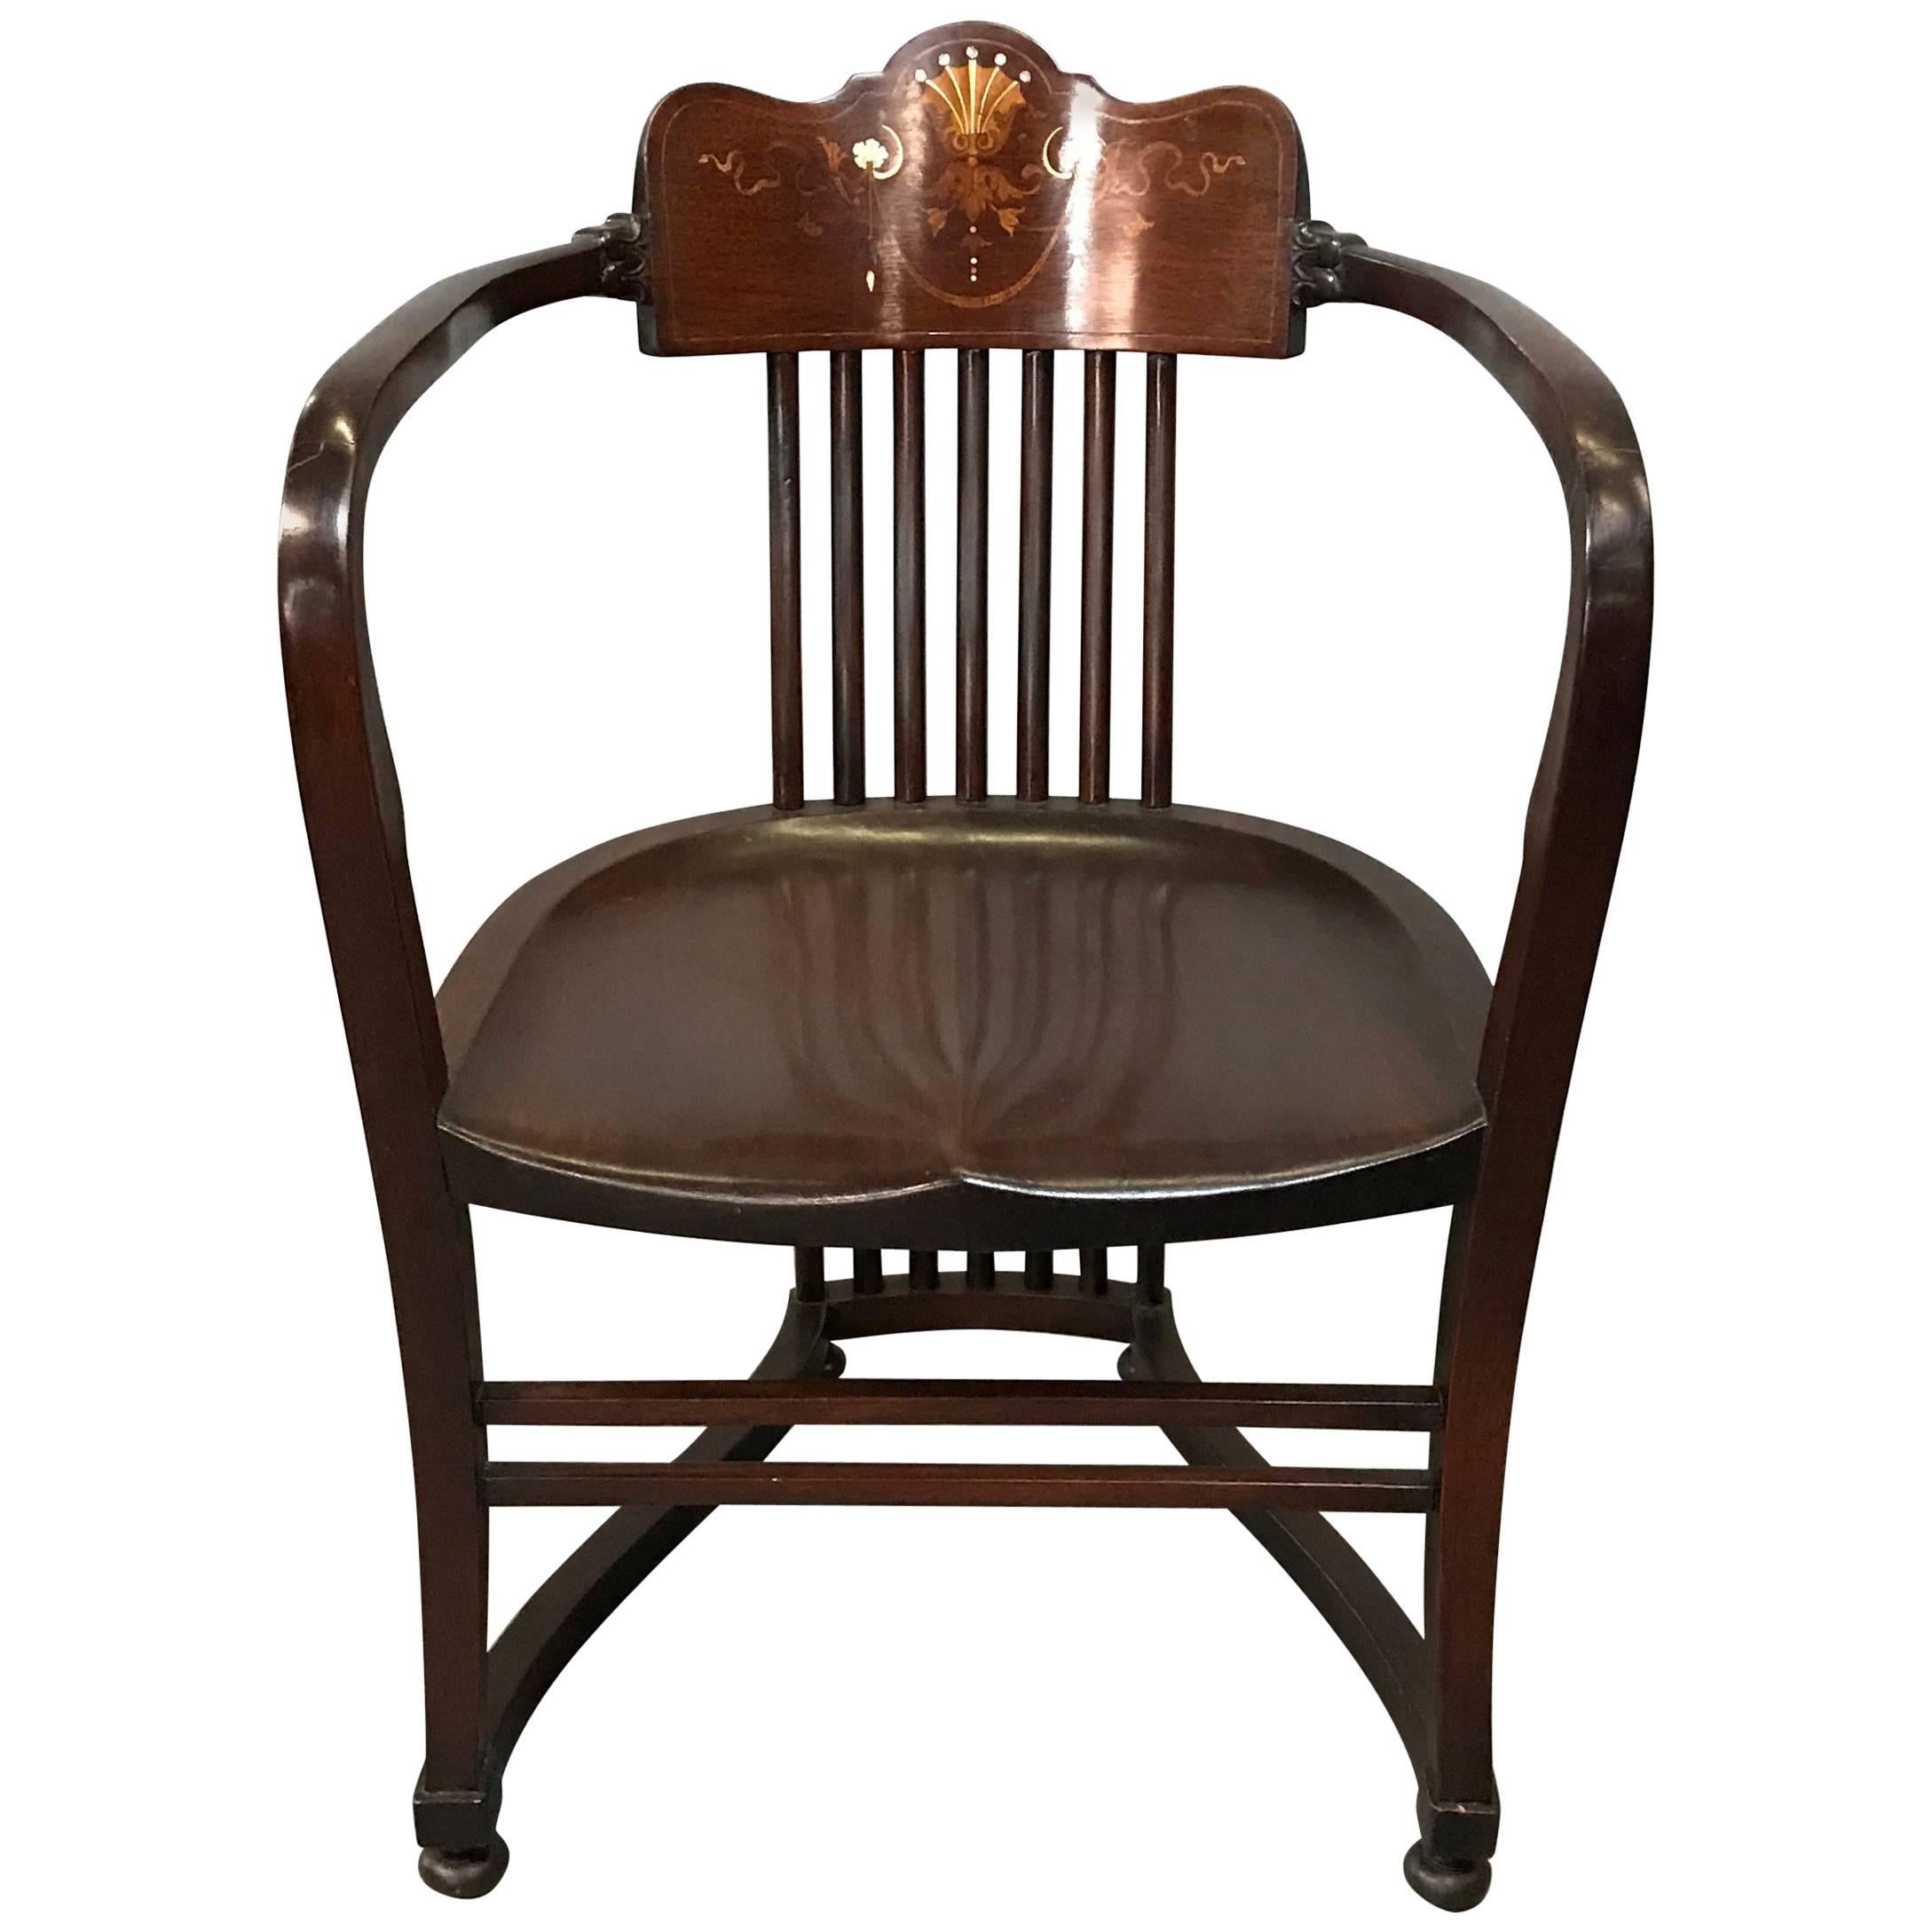 19th Century American Mahogany Armchair with Mother-of-Pearl Detail